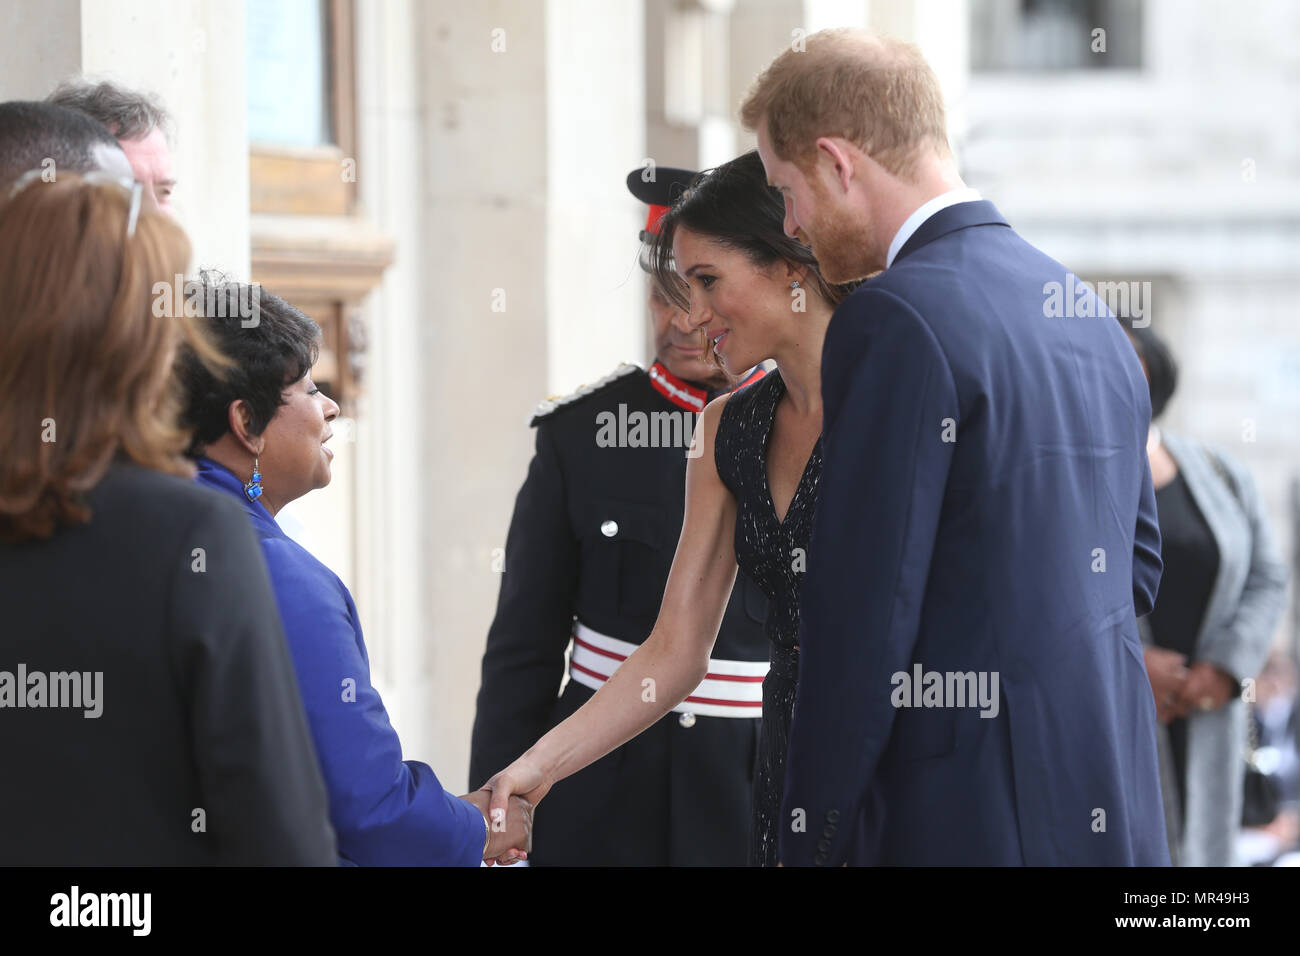 Memorial service to celebrate the life and legacy of Stephen Lawrence, at St Martin-in-the-Fields, Trafalgar Square, London.  Featuring: Prince Harry, Meghan Markle, Doreen Lawrence, Baroness Lawrence of Clarendon Where: London, United Kingdom When: 23 Apr 2018 Credit: WENN.com Stock Photo